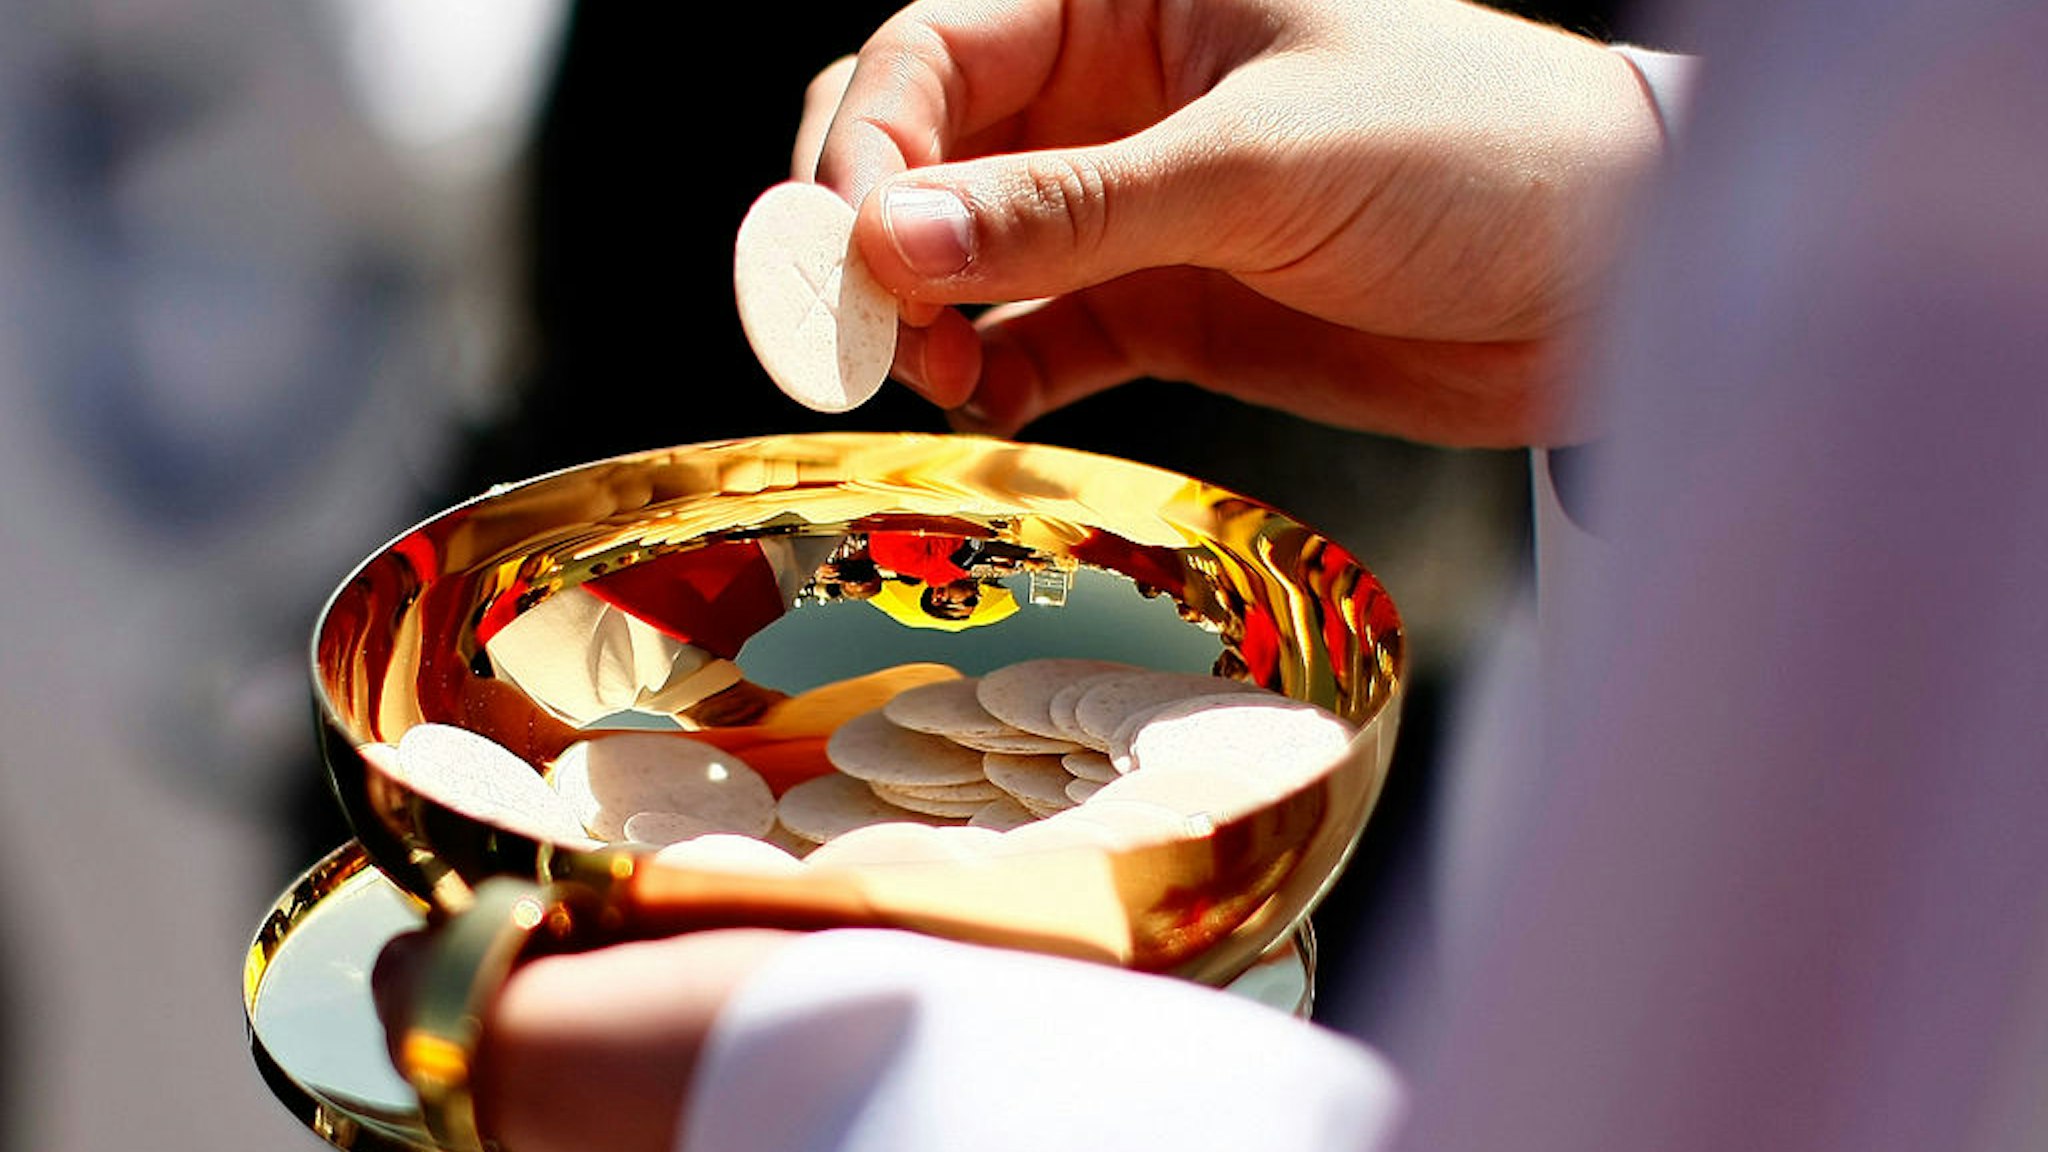 WASHINGTON - APRIL 17: A priest holds a Holy Communion wafer as Pope Benedict XVI celebrates Mass at Nationals Park April 17, 2008 in Washington, DC. Today is Pope Benedict XVI's third day of his visit to the United States. (Photo by Win McNamee/Getty Images)